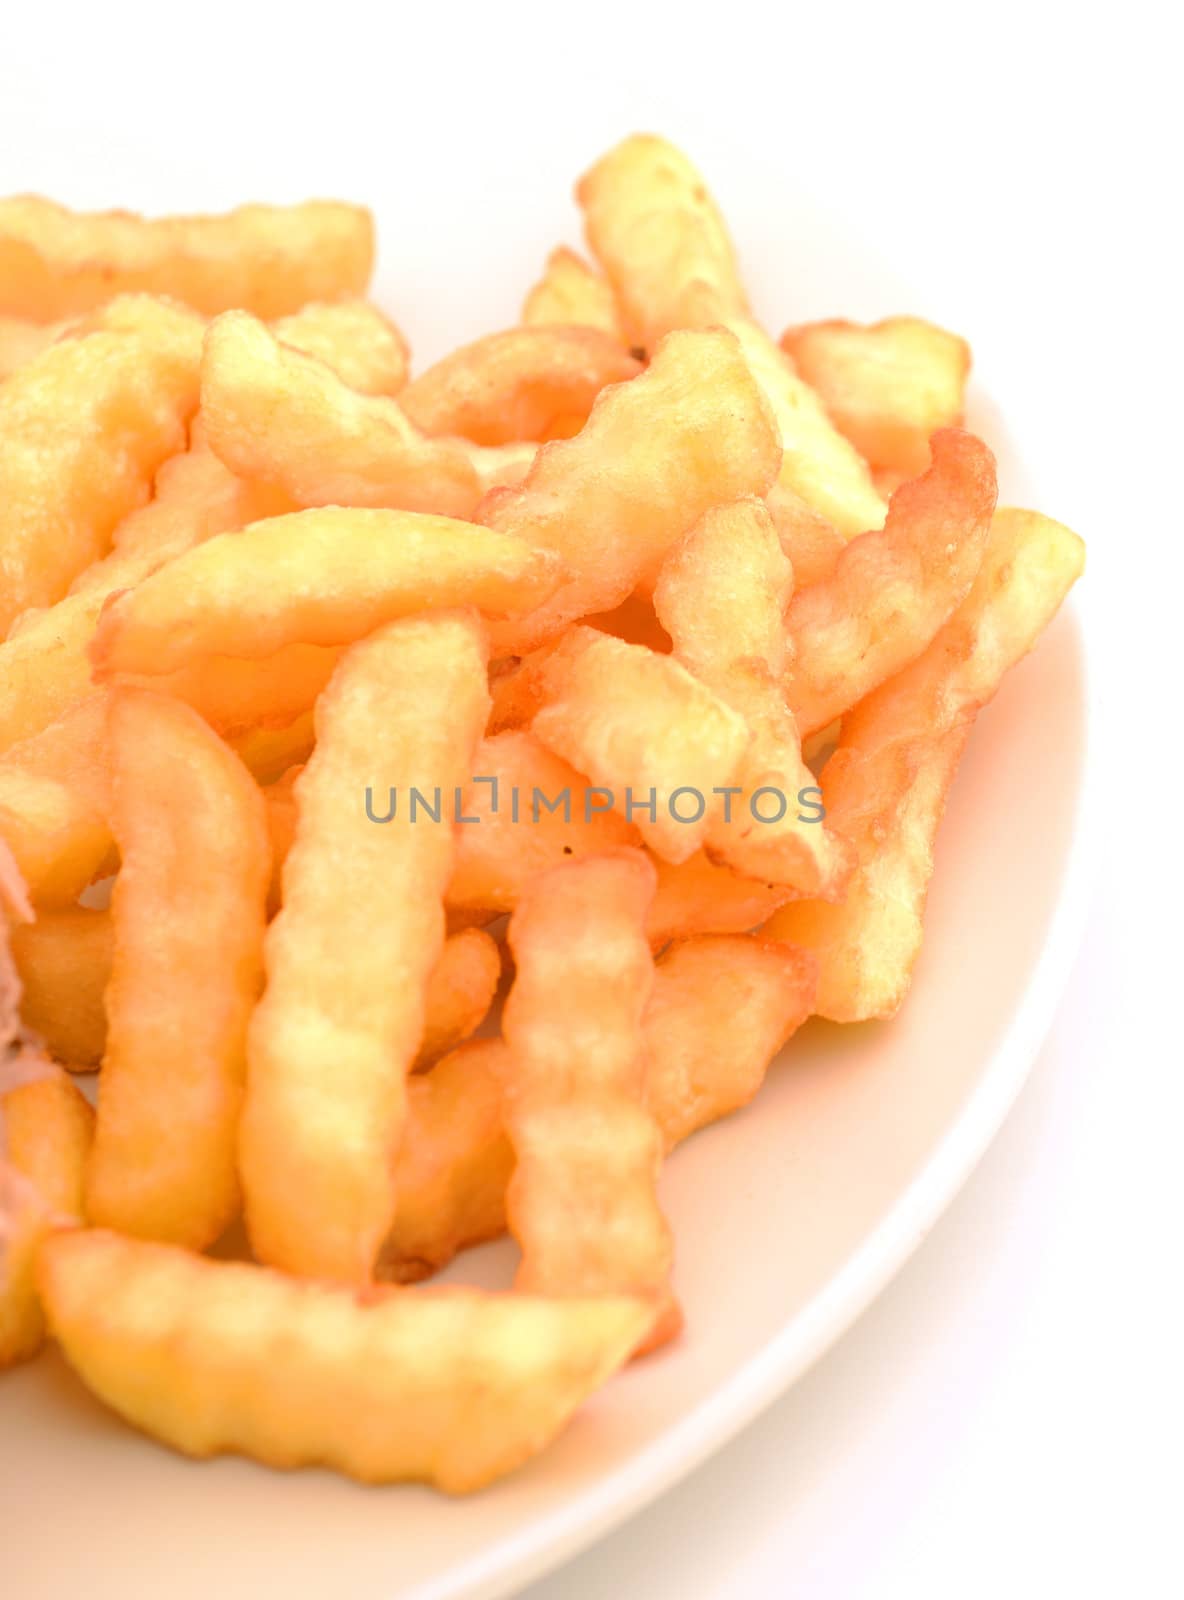 crinkle cut french fries on a plate with nobody